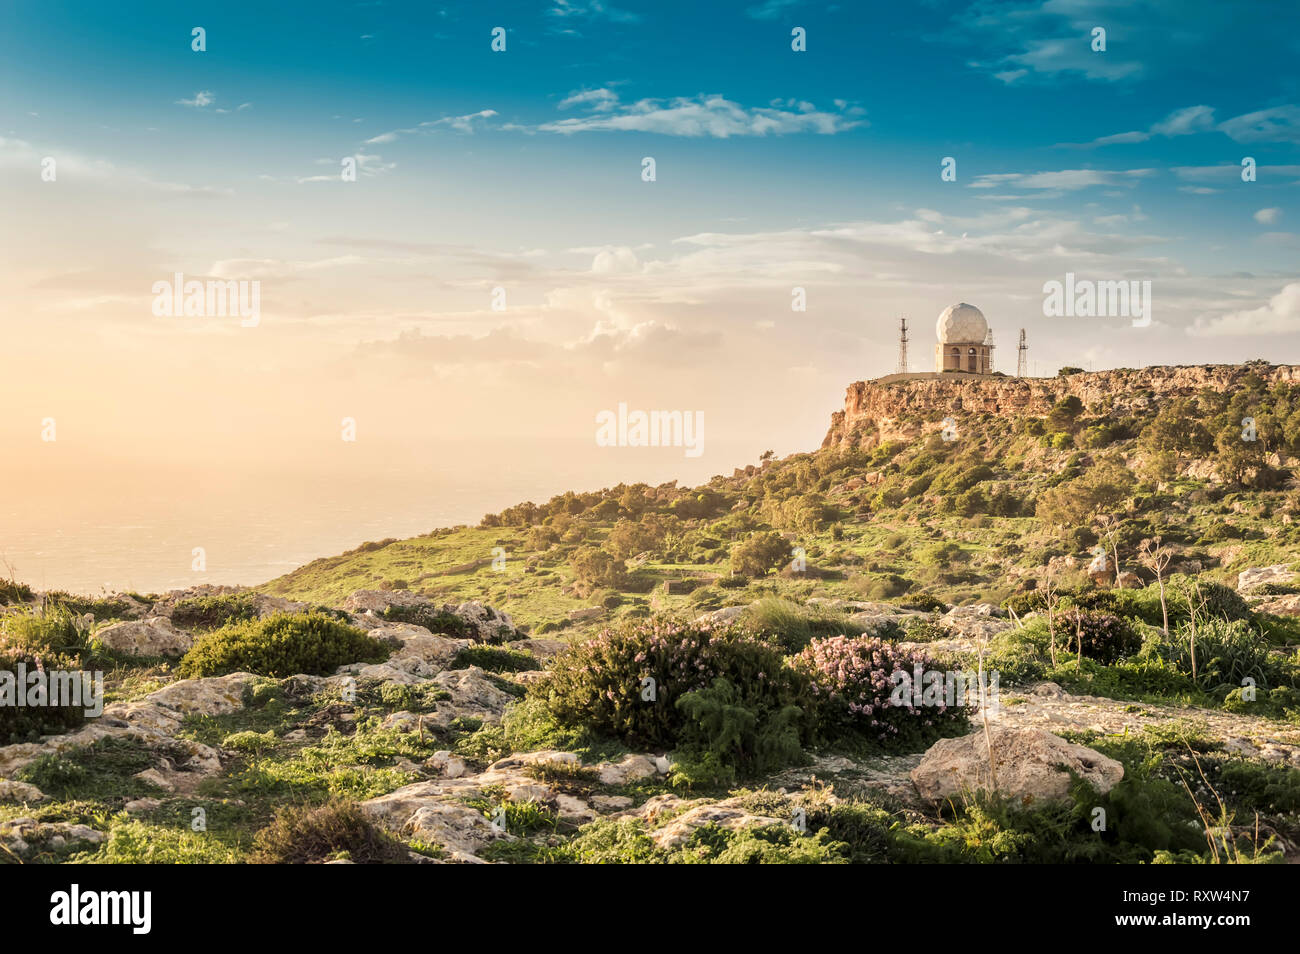 Dingli Cliffs, Malta: Panoramic road with a romantic view over Dingli Cliffs and Aviation radar at sunset Stock Photo